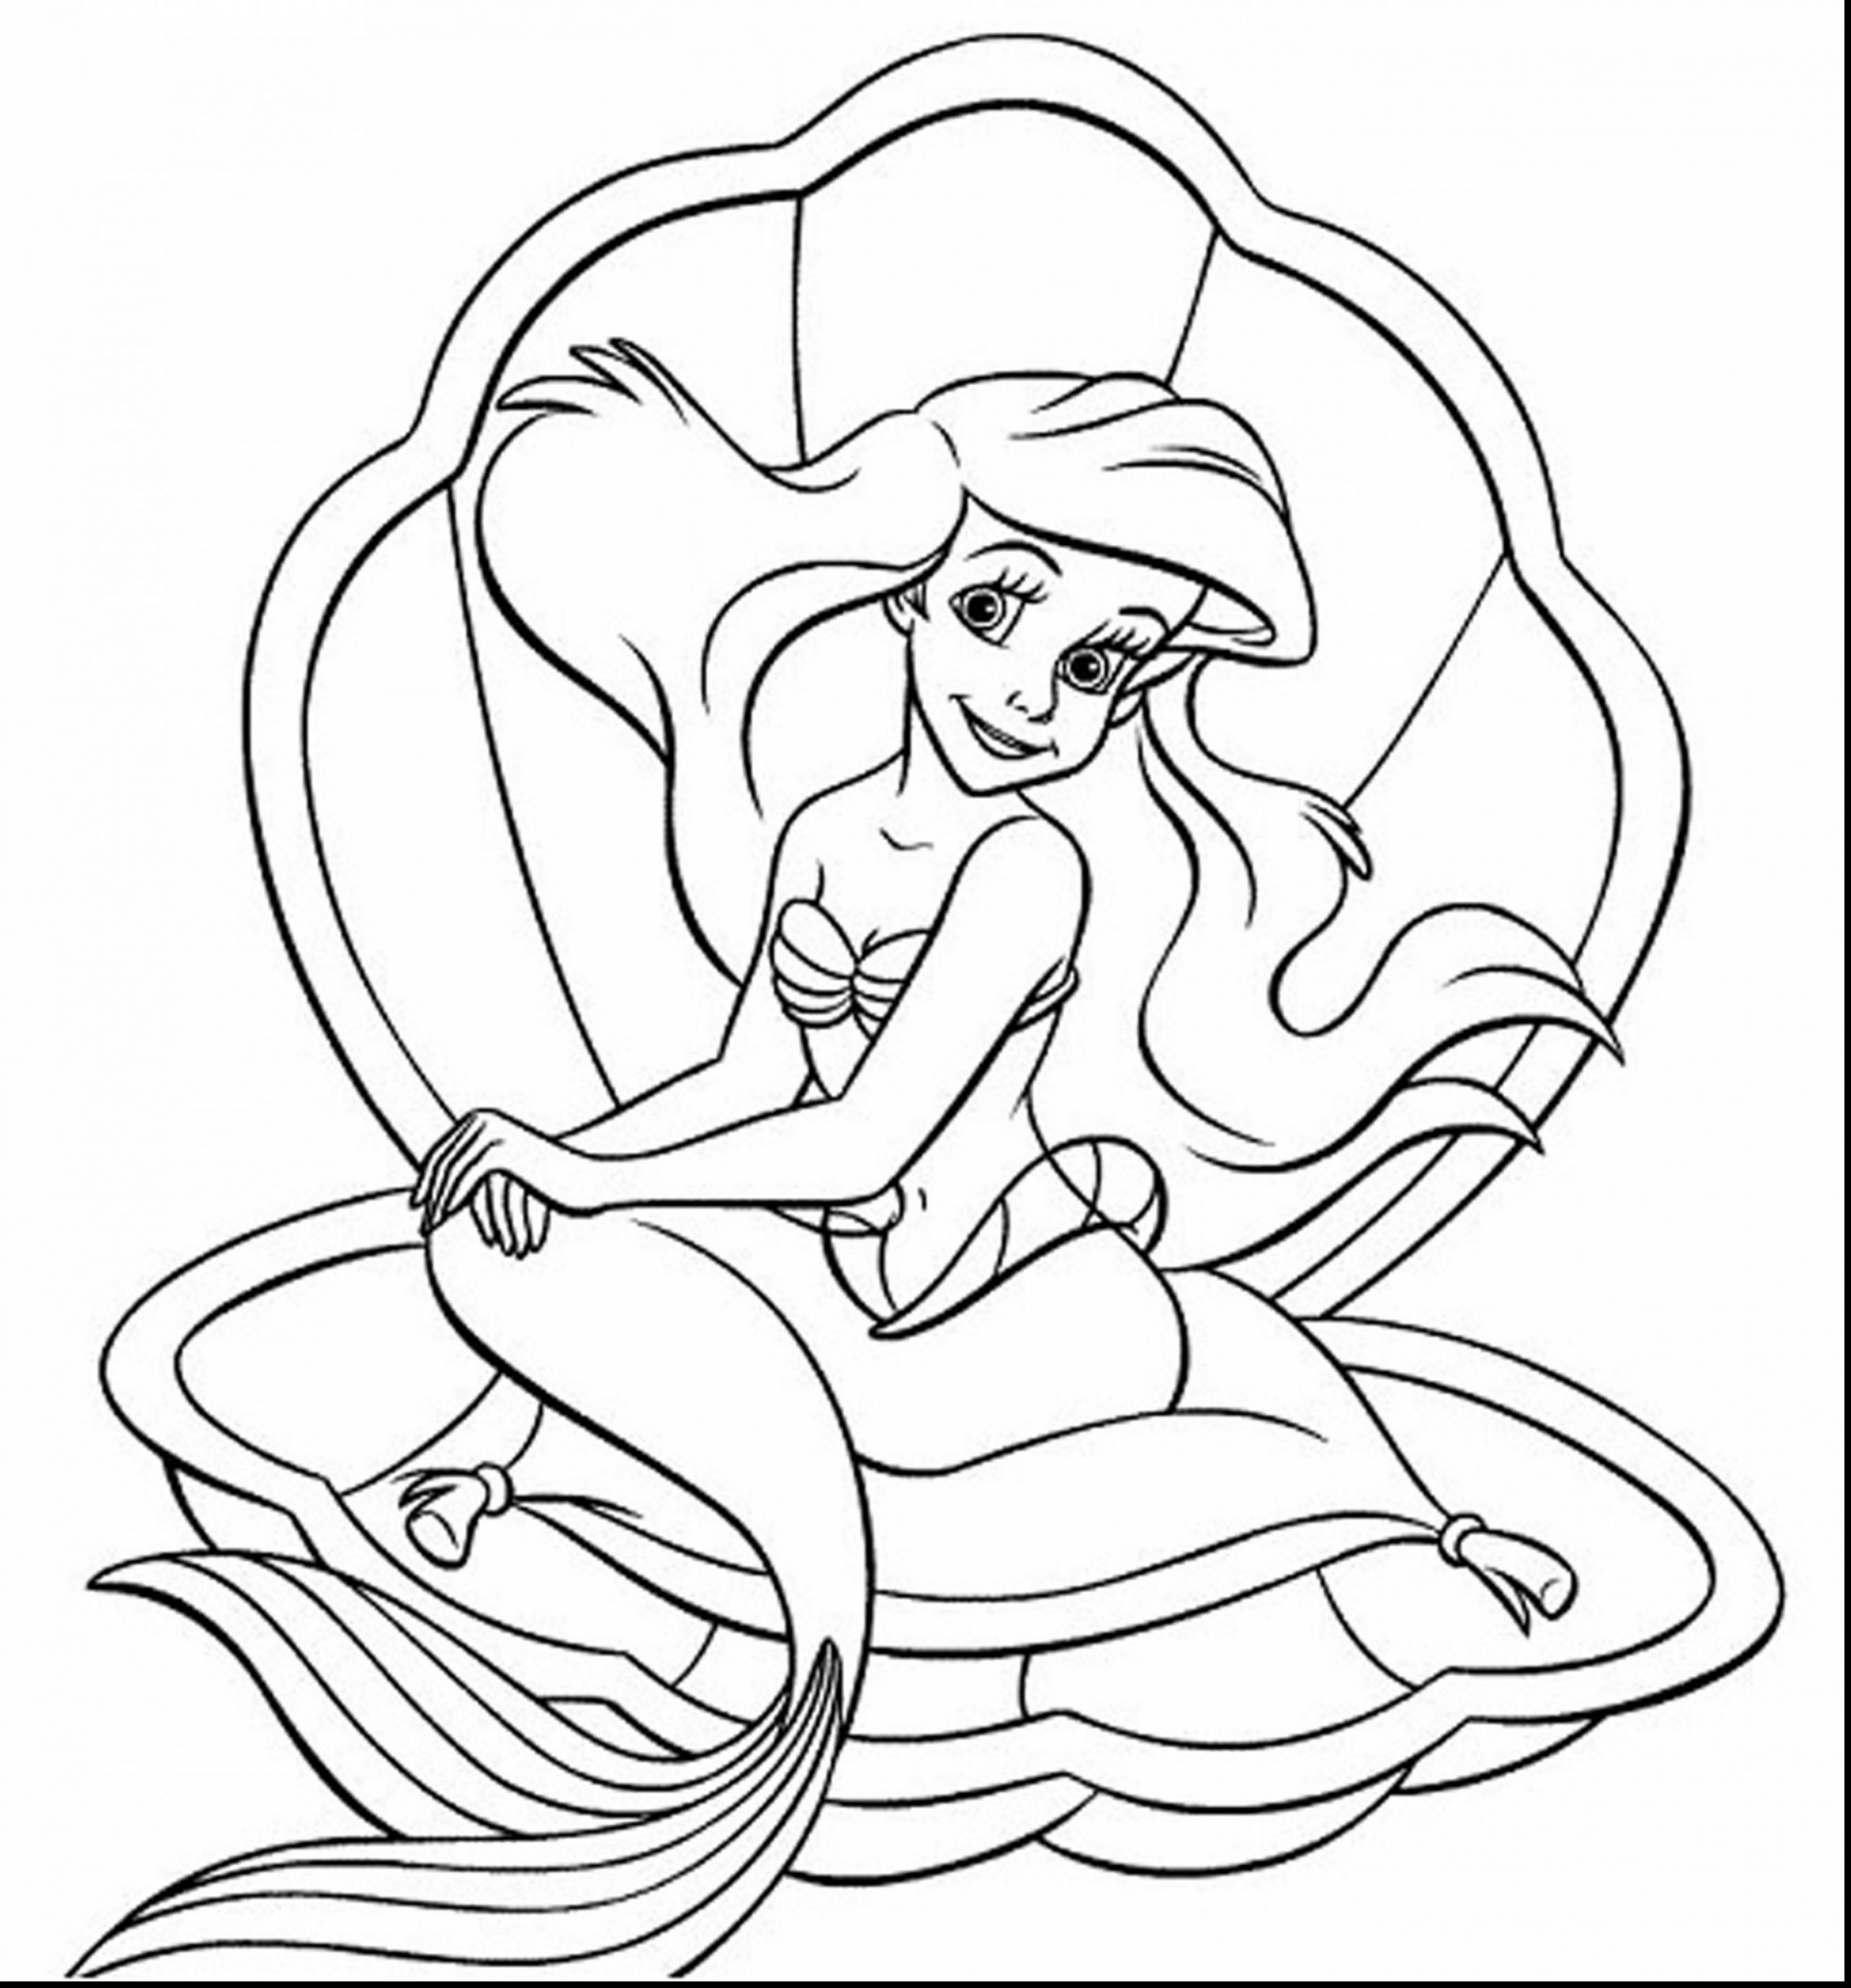 Baby Princess Coloring Pages
 Baby Ariel Coloring Pages at GetColorings